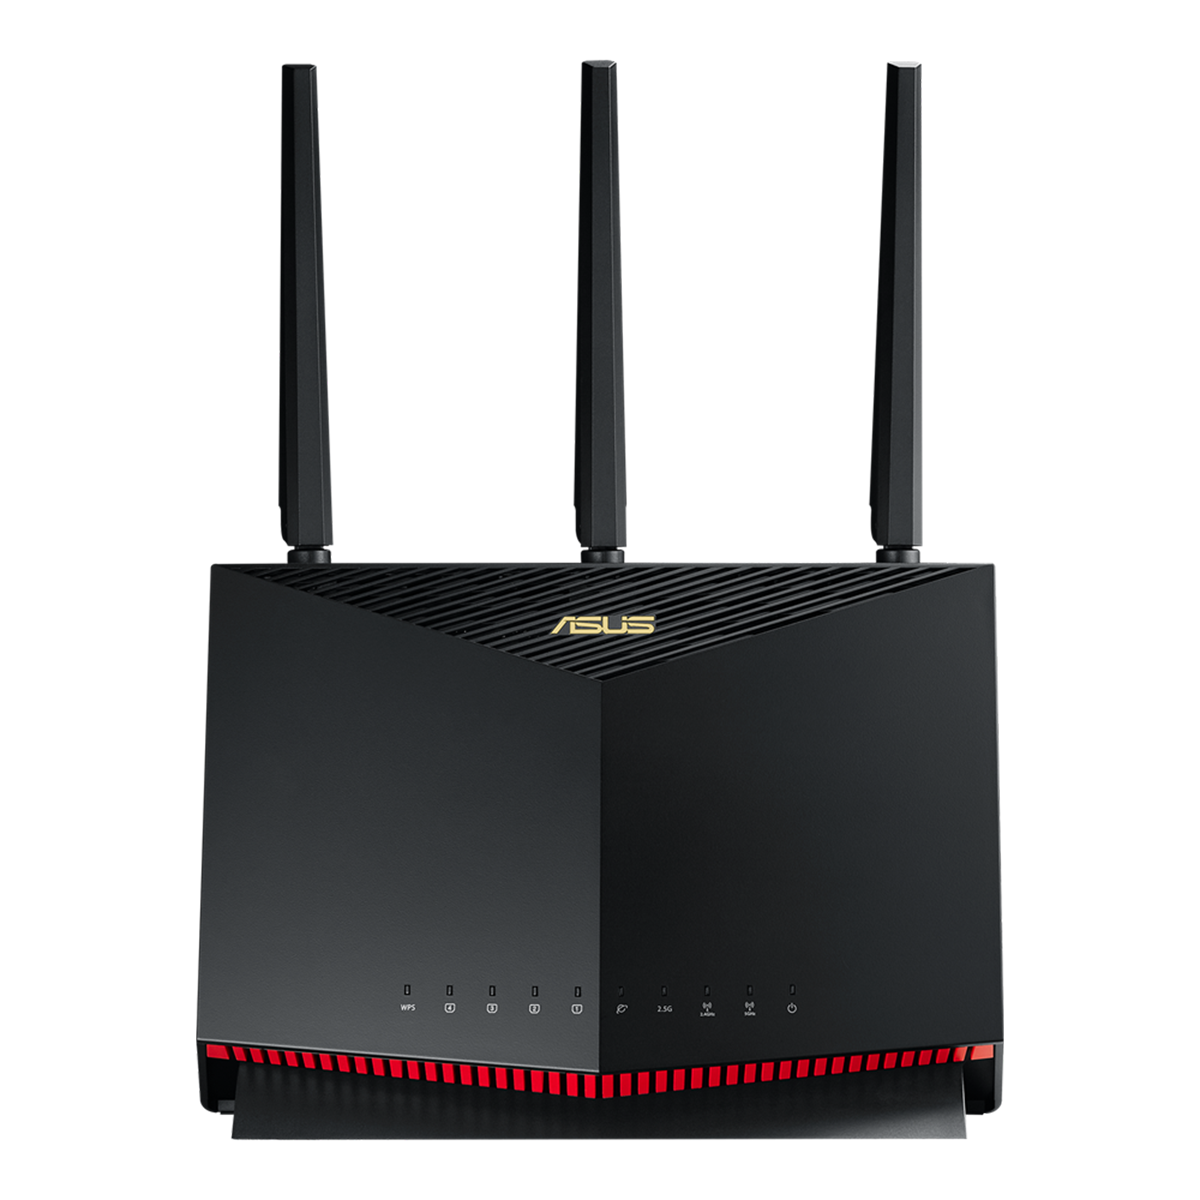 ASUS RT-AX86U/RT-AX86S AX5700 Dual Band WiFi 6 Gaming Router with AiMesh Support, Parental Control, Lifetime free Internet Security USB3.2 Gen 1 Port